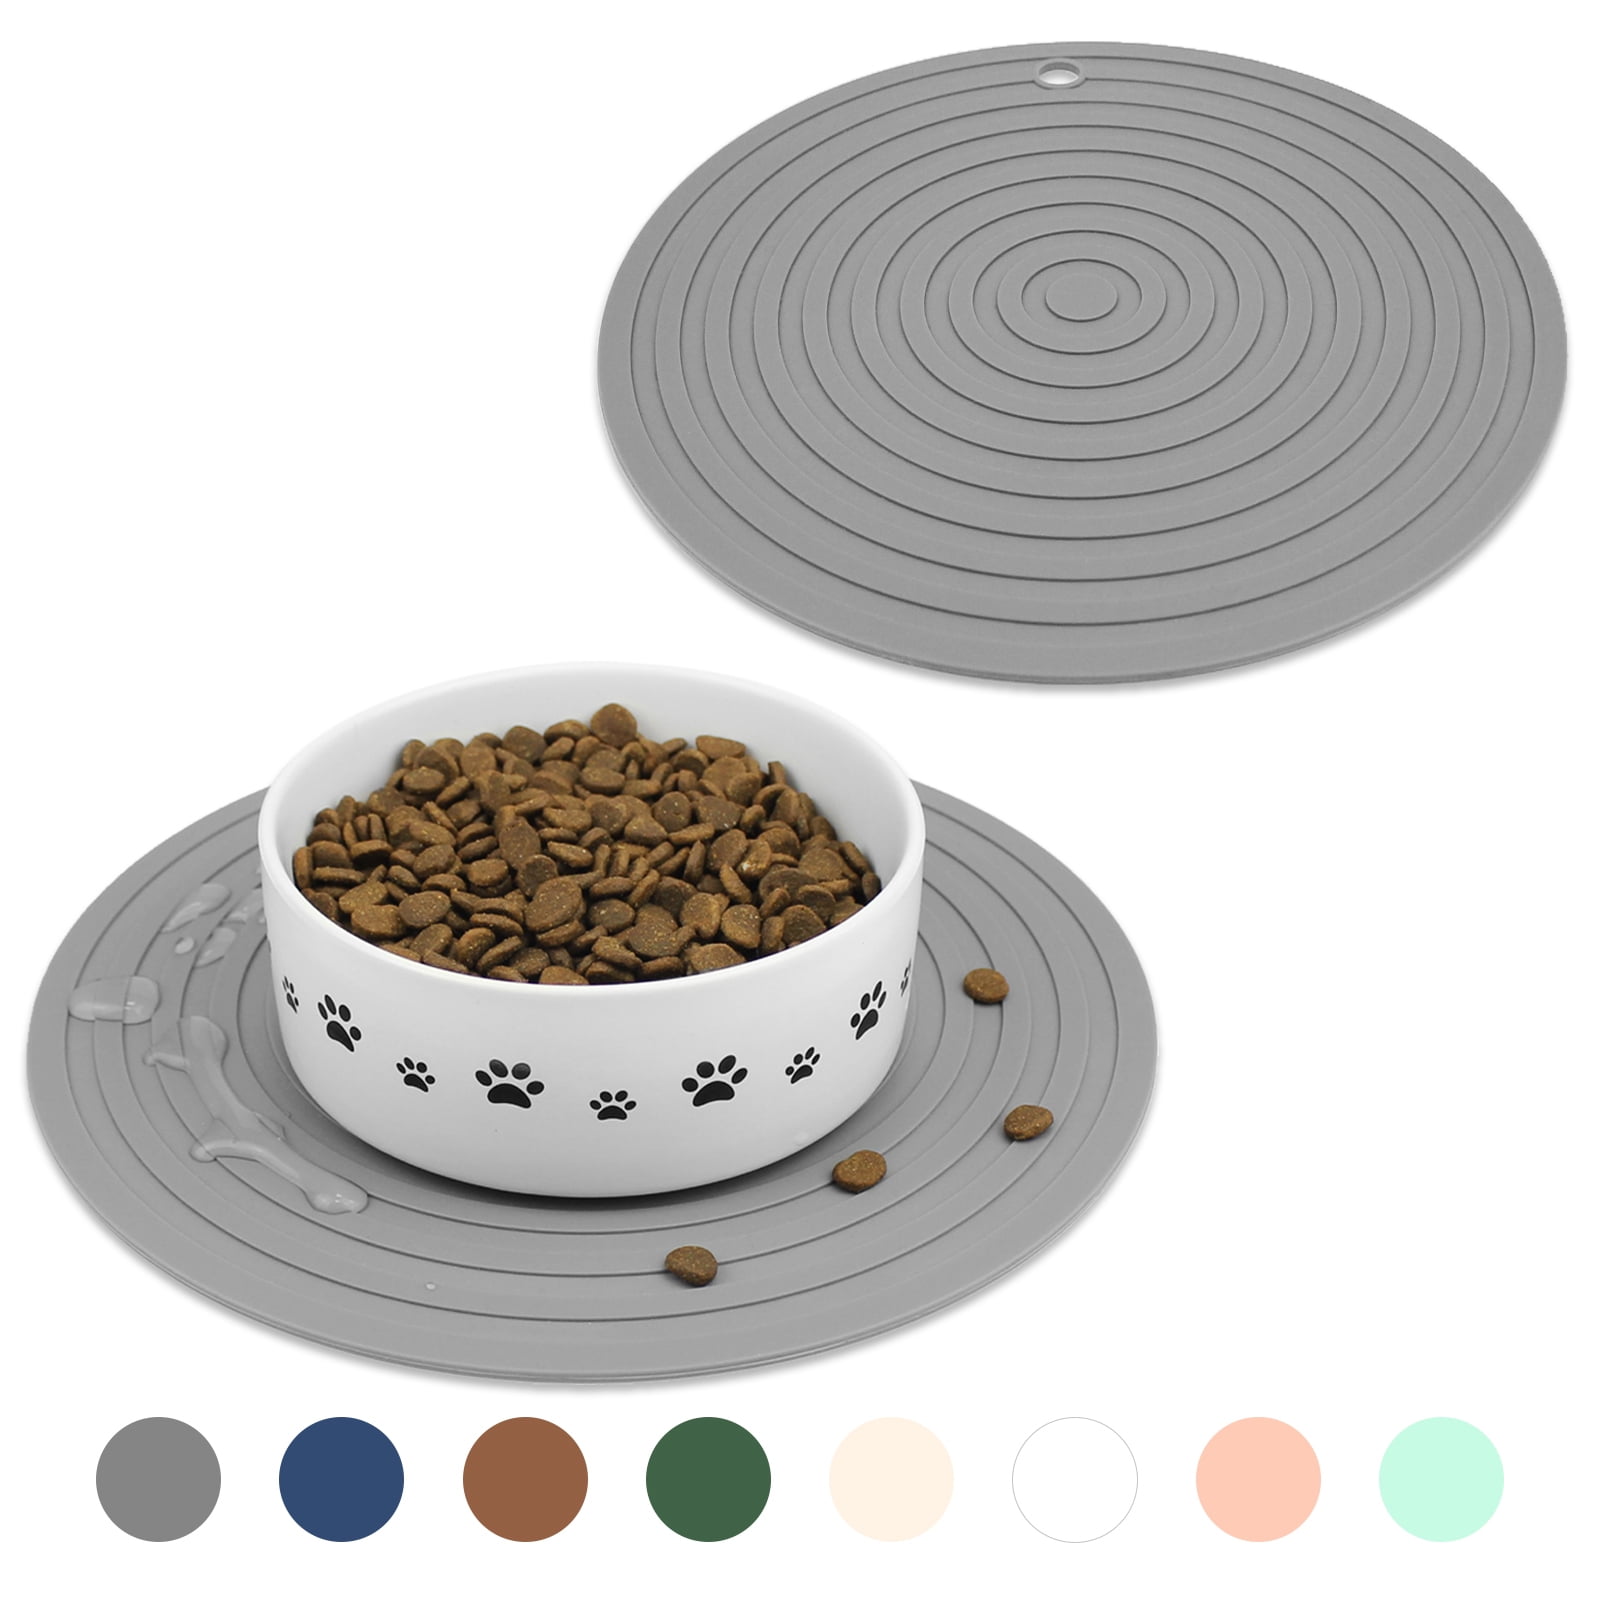 Arkwright Dog Food Mat (16x24 in) with Non-Slip Backing, Food Bowl Mat - 16 x 24 inch - Dinner